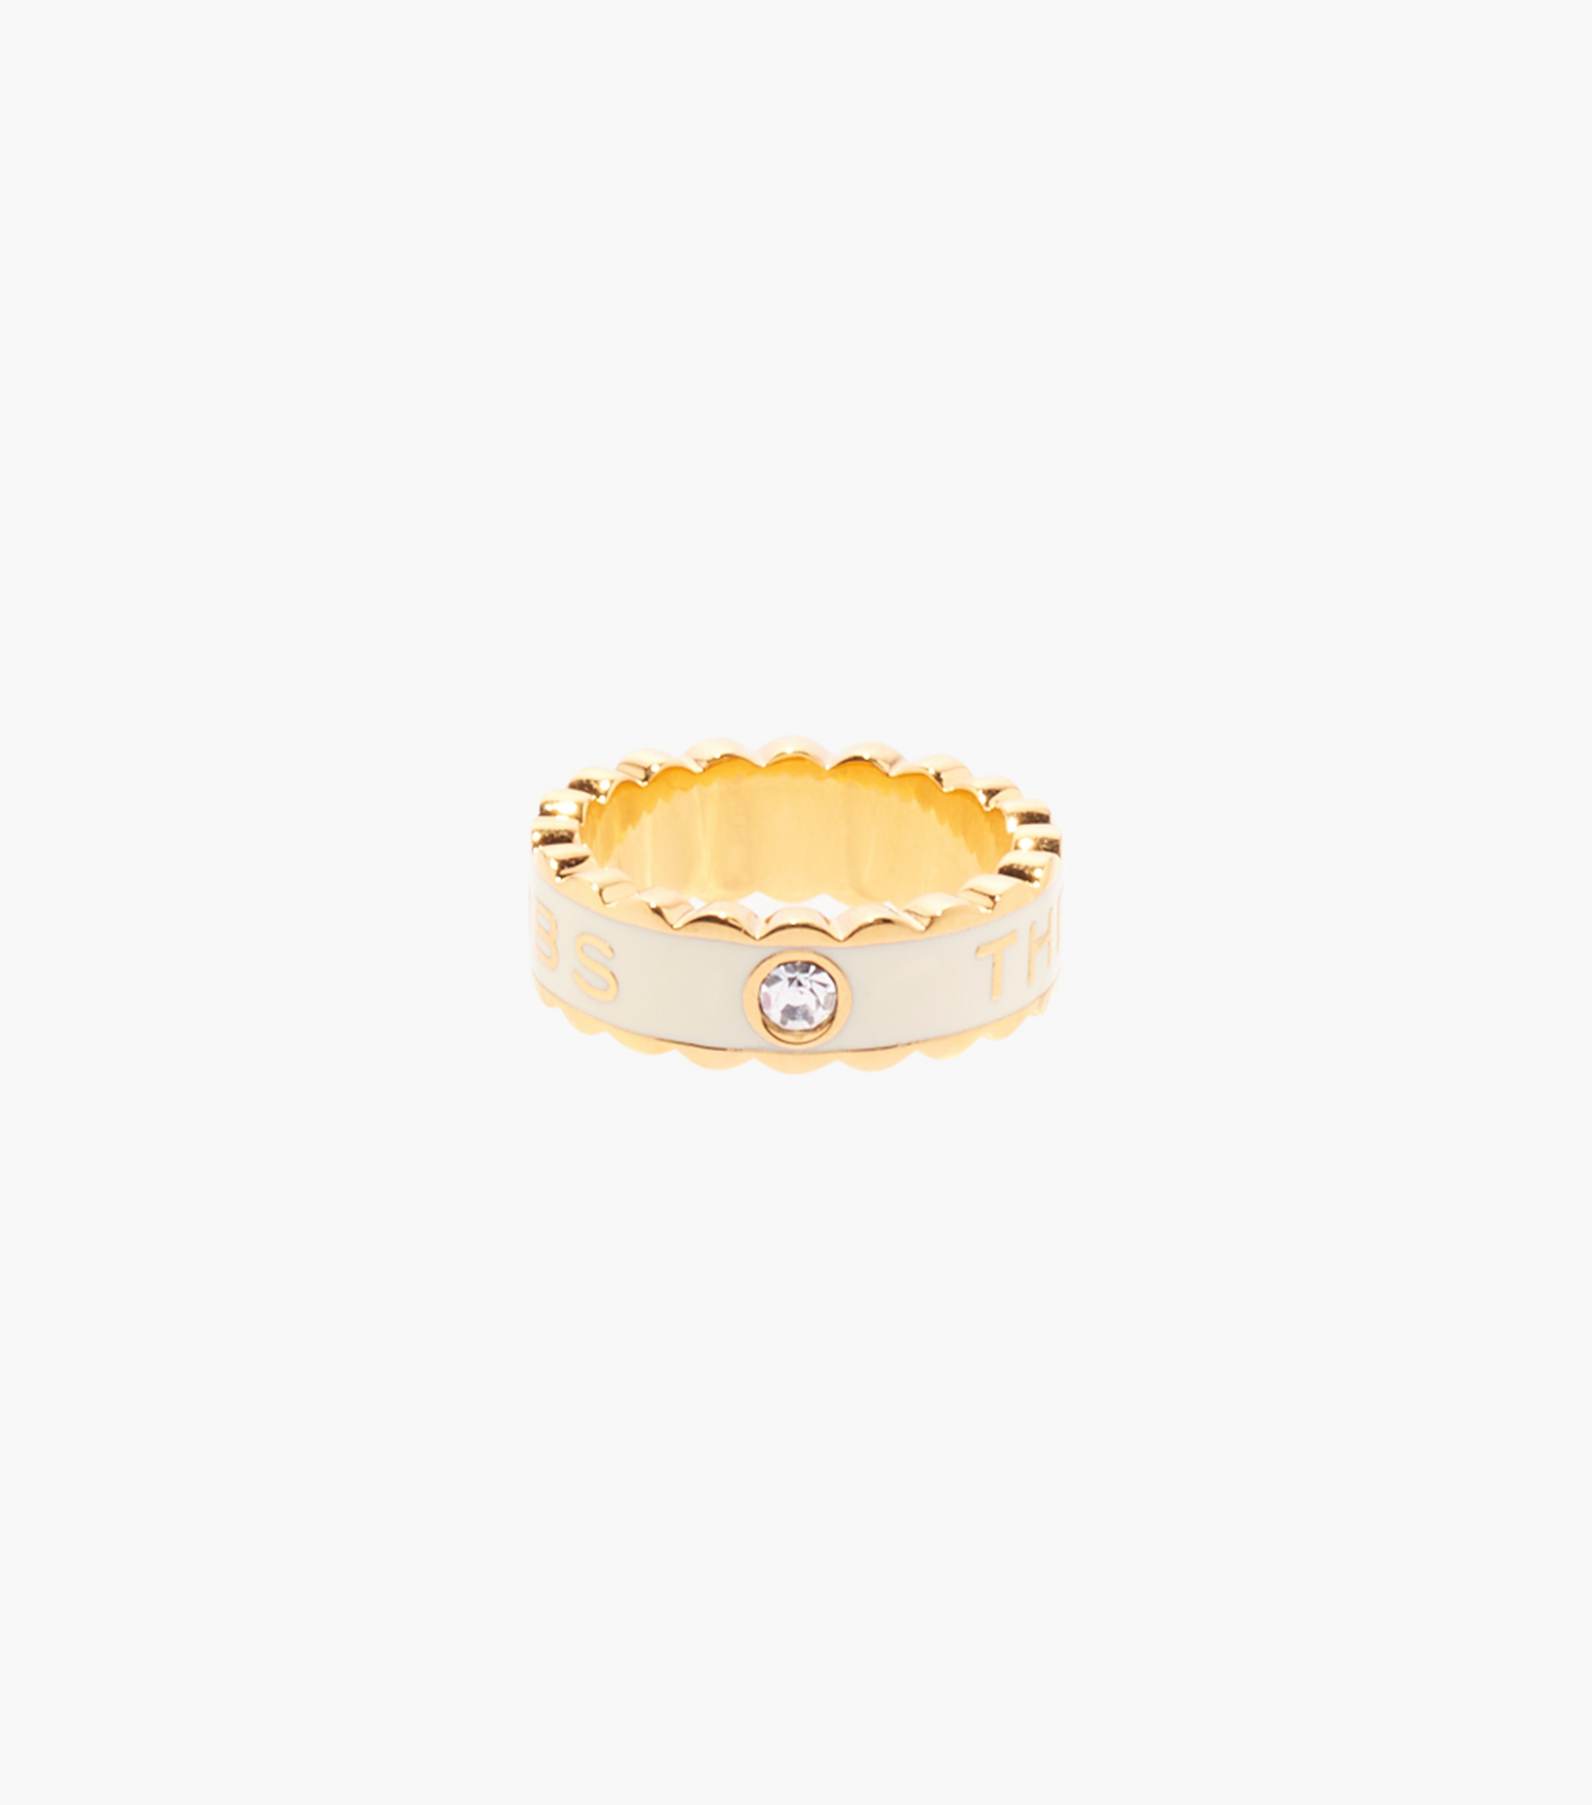 THE SCALLOP MEDALLION RING